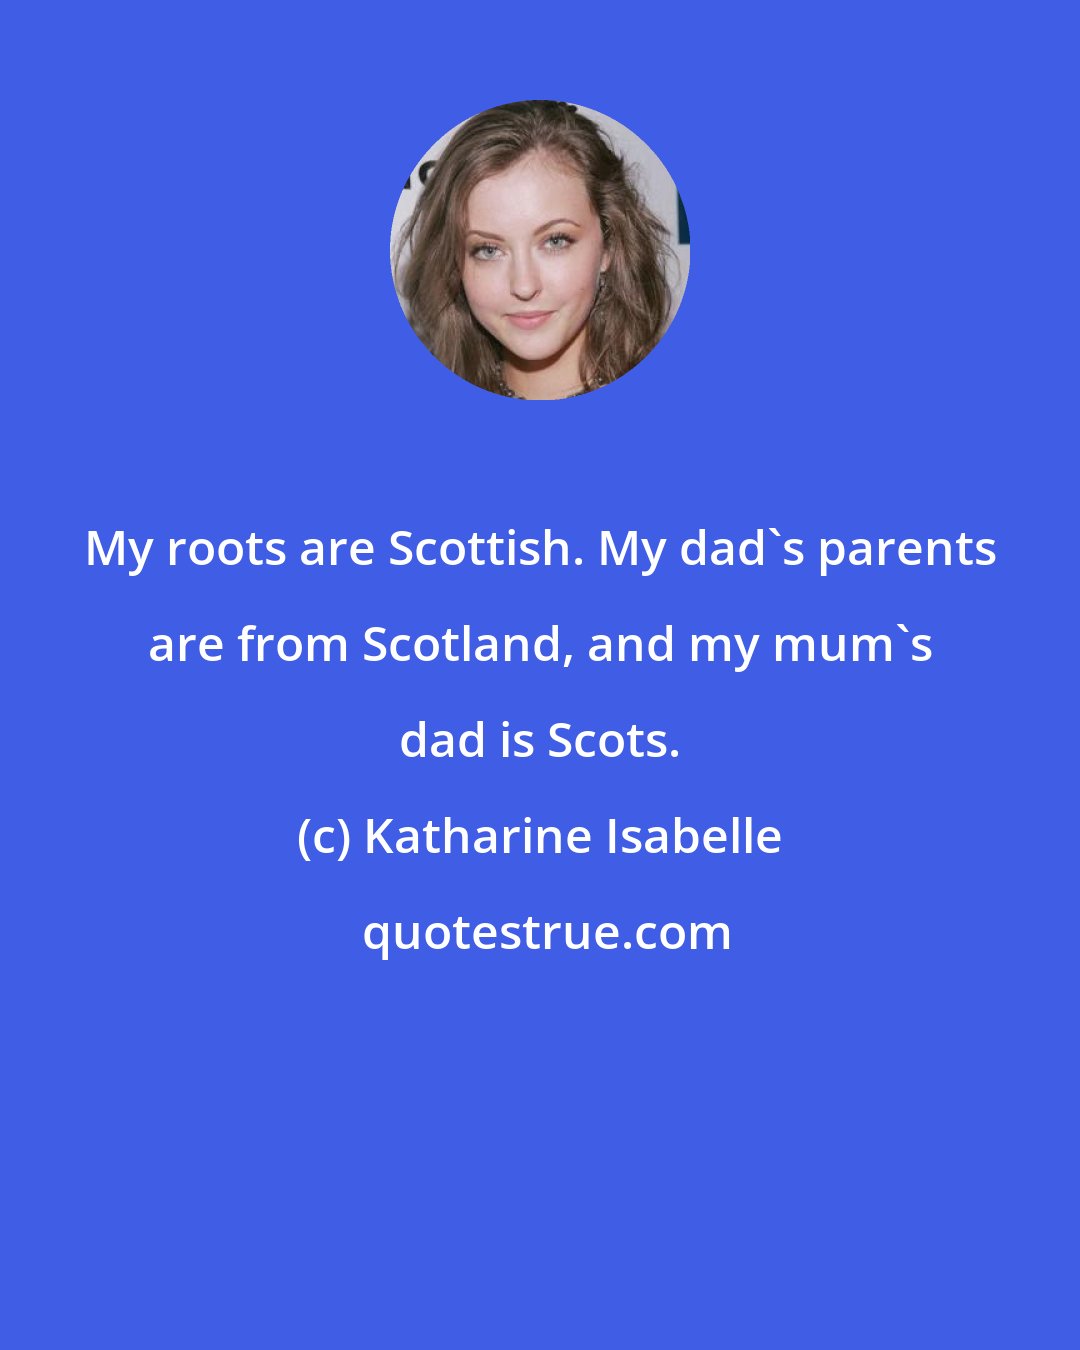 Katharine Isabelle: My roots are Scottish. My dad's parents are from Scotland, and my mum's dad is Scots.